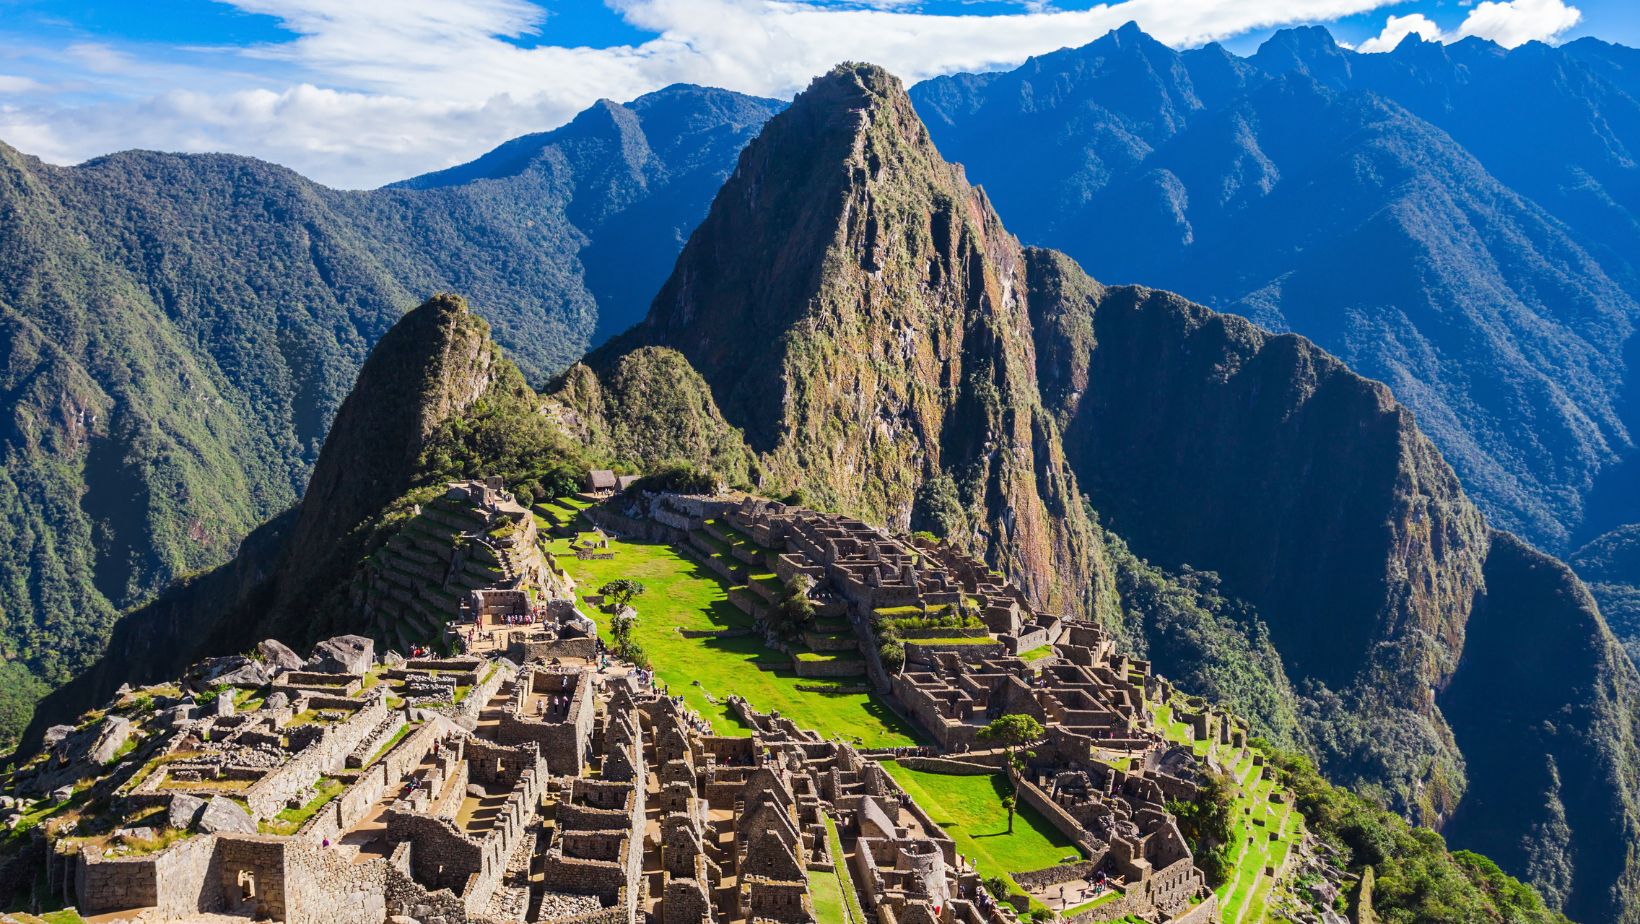 What are the Most Ways to See Machu Picchu?